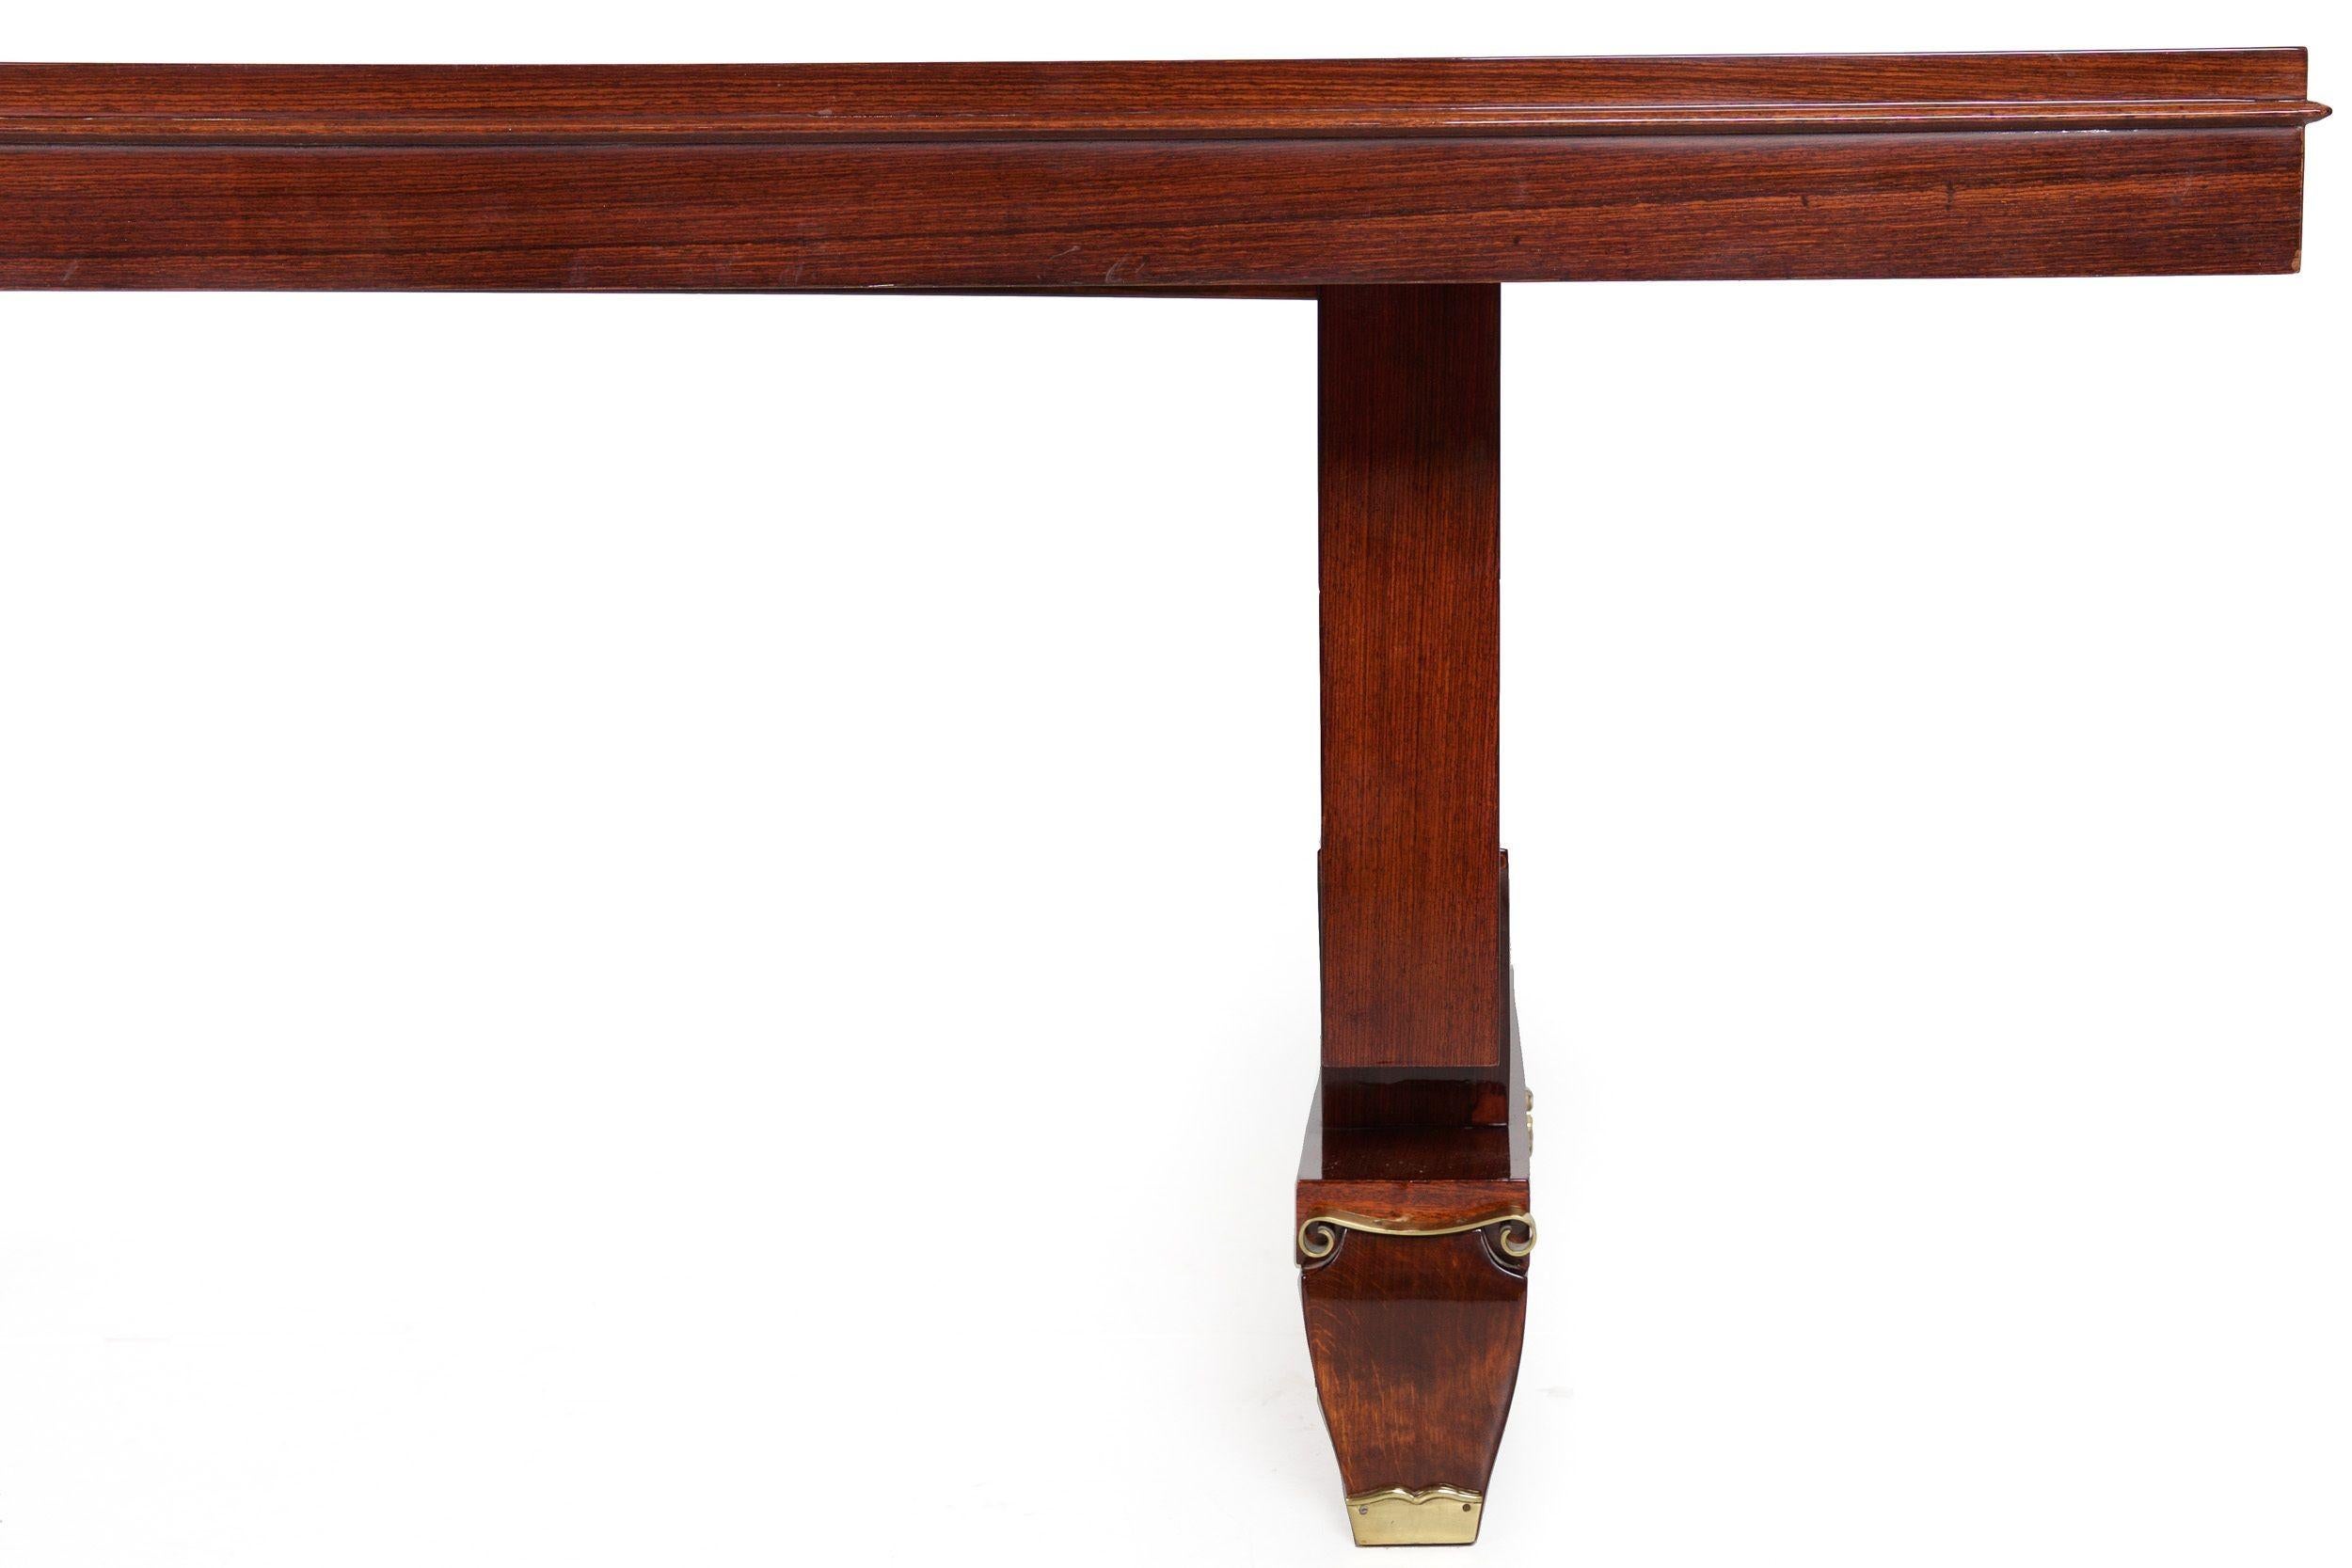 French Art Deco Inlaid Mother-of-Pearl Rosewood Dining Table, circa 1940s For Sale 1